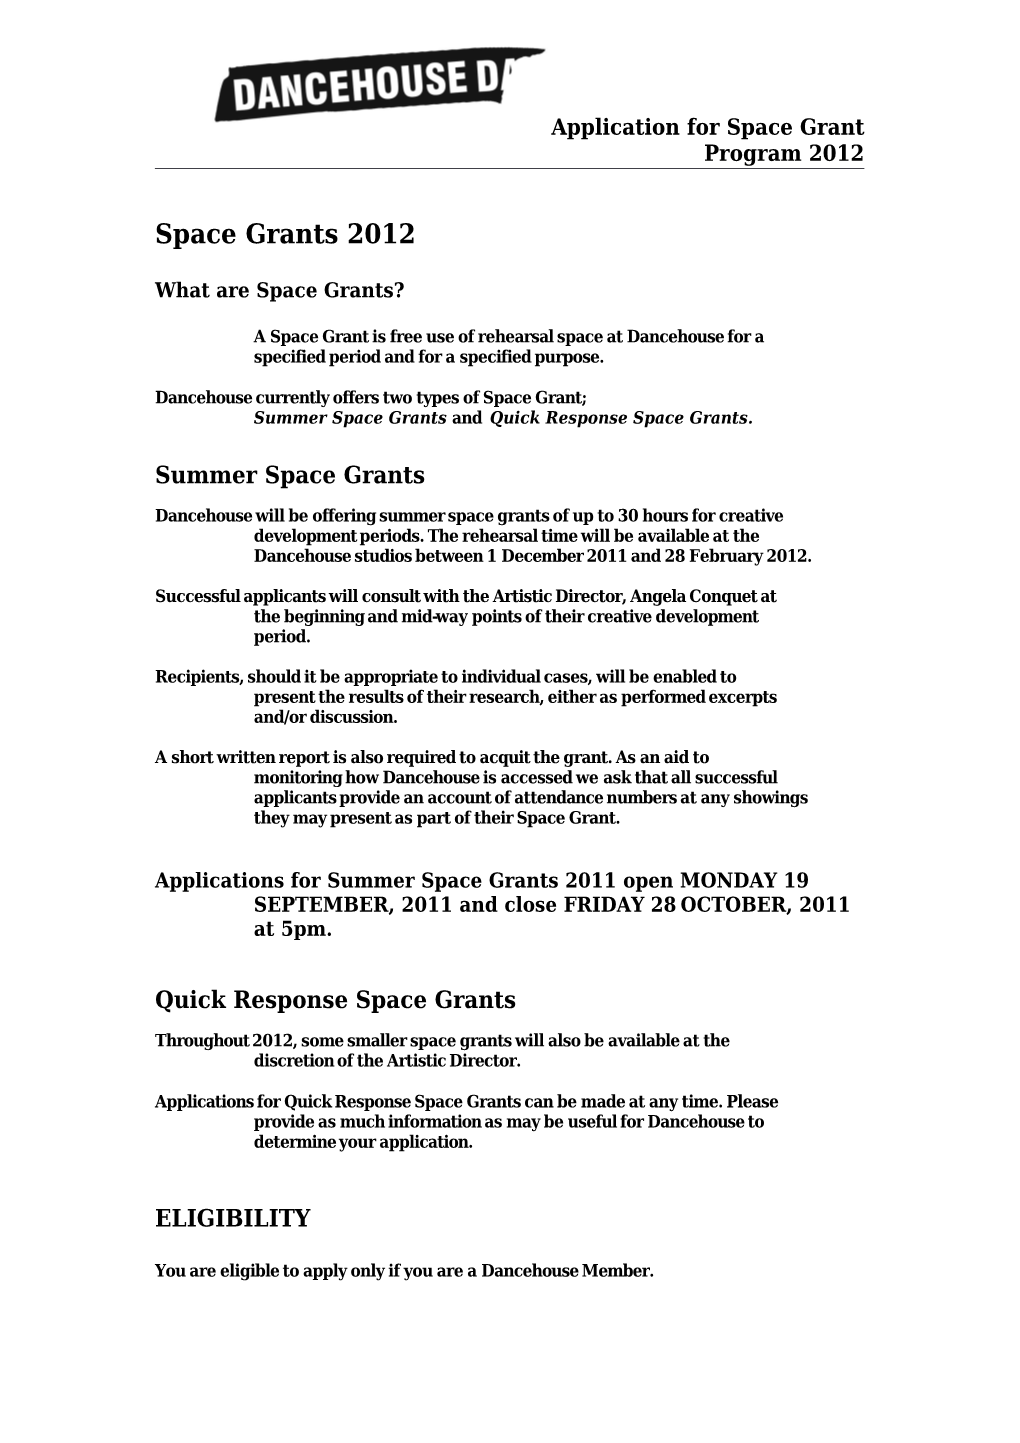 What Are Space Grants?